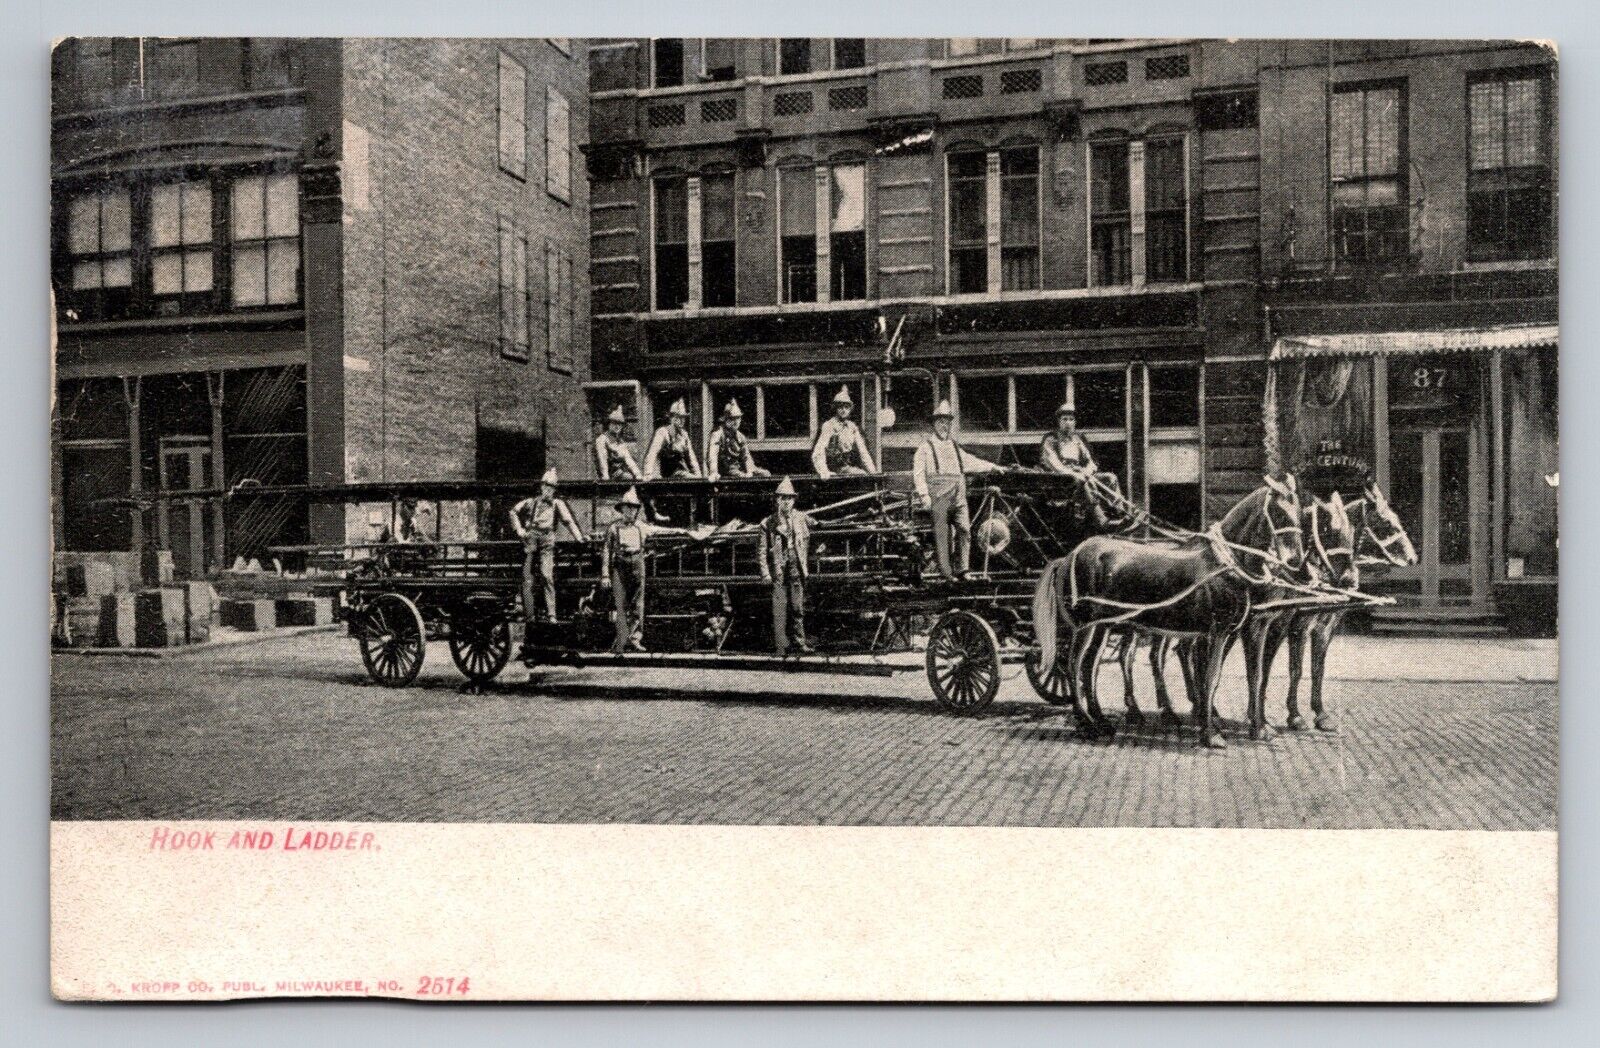 Hook And Ladder Fire Department Milwaukee Wisconsin Vintage Posted 1909 Postcard